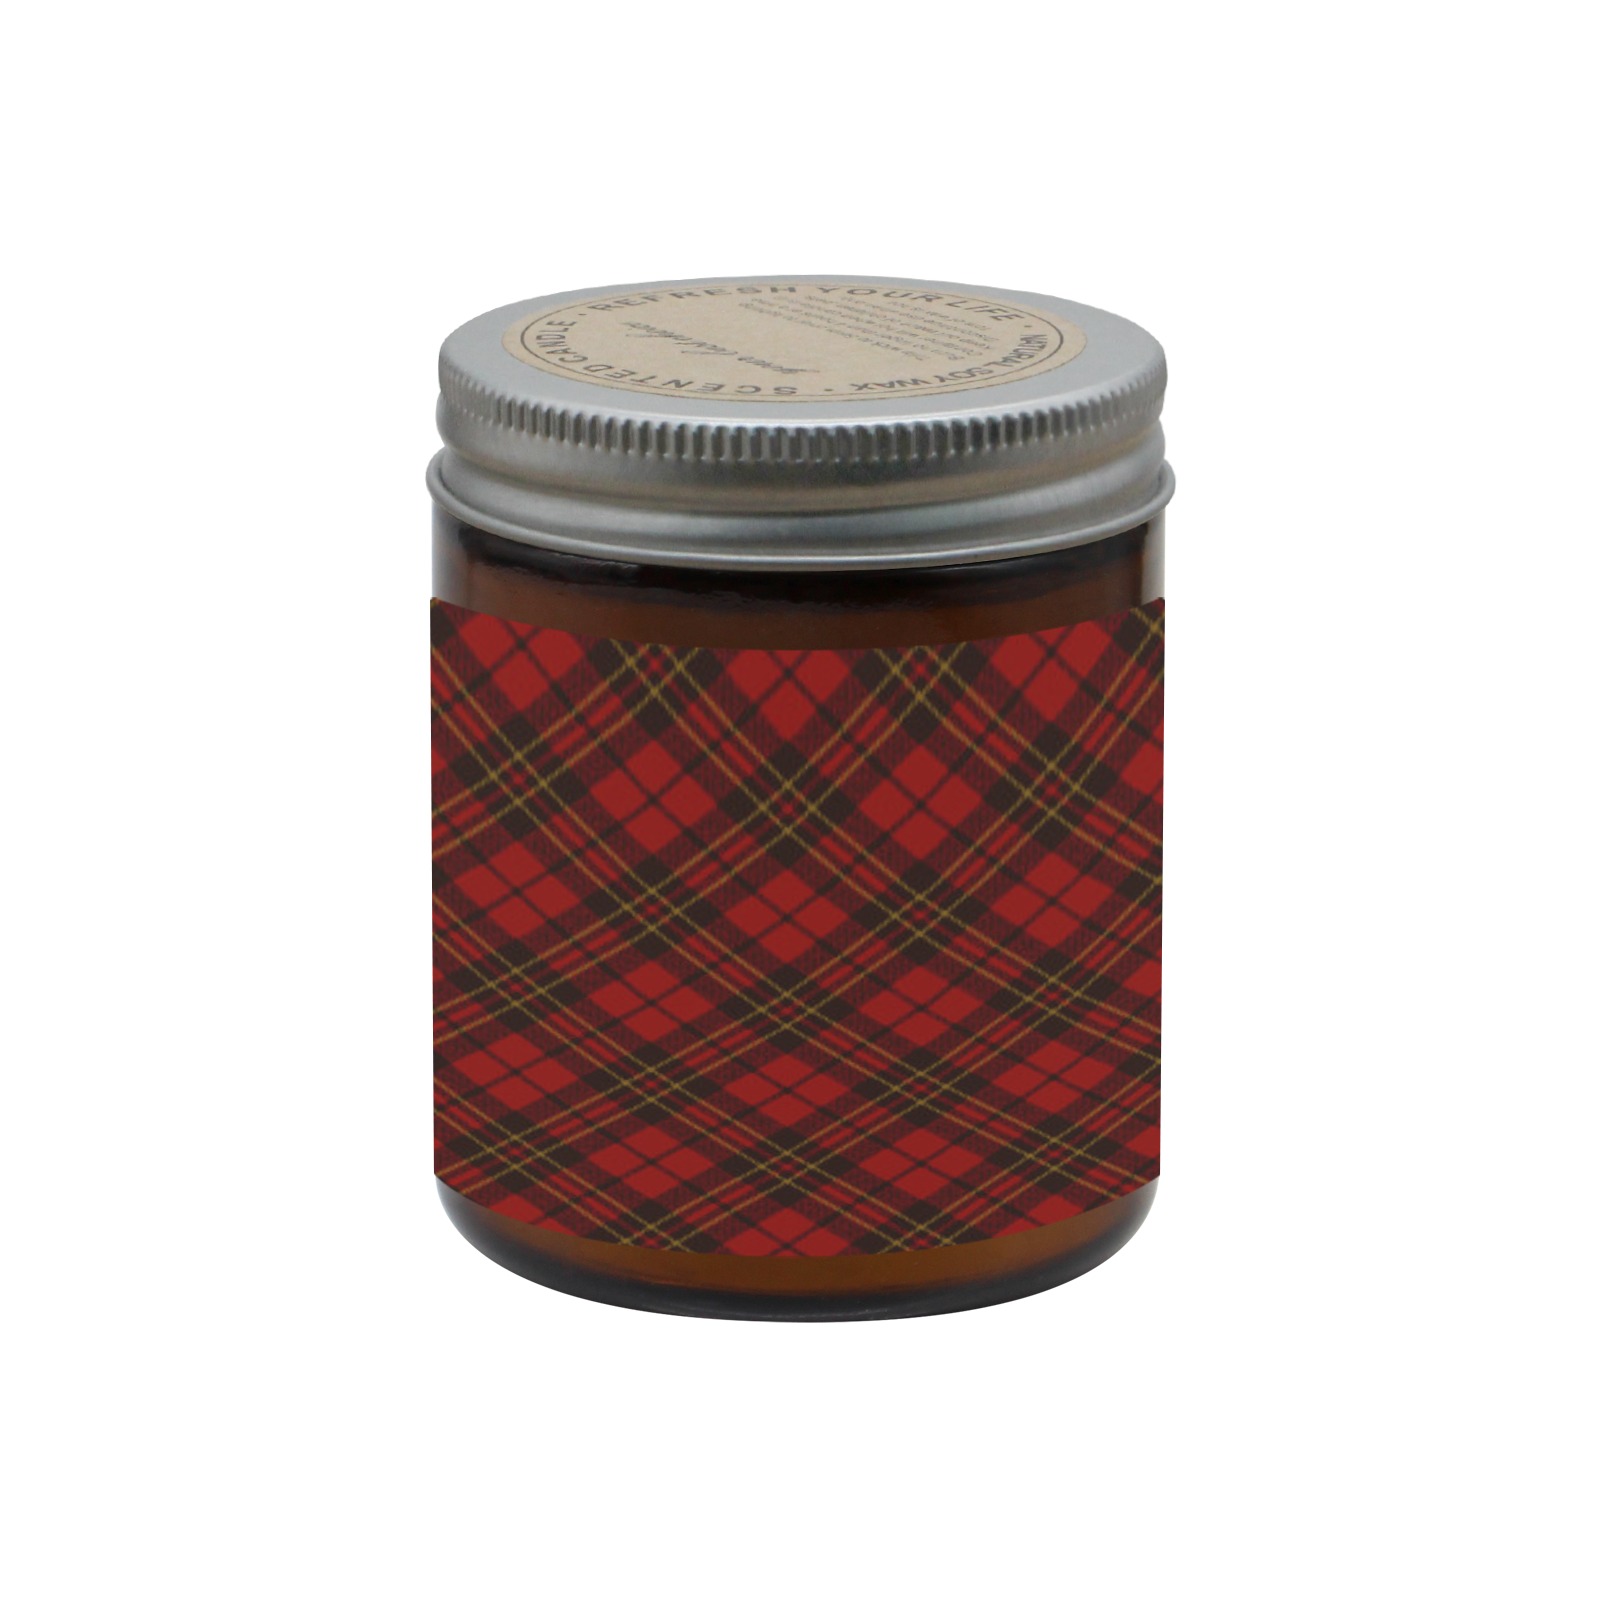 Red tartan plaid winter Christmas pattern holidays Tawny Candle Cup - Large Size (Rose Sandal)